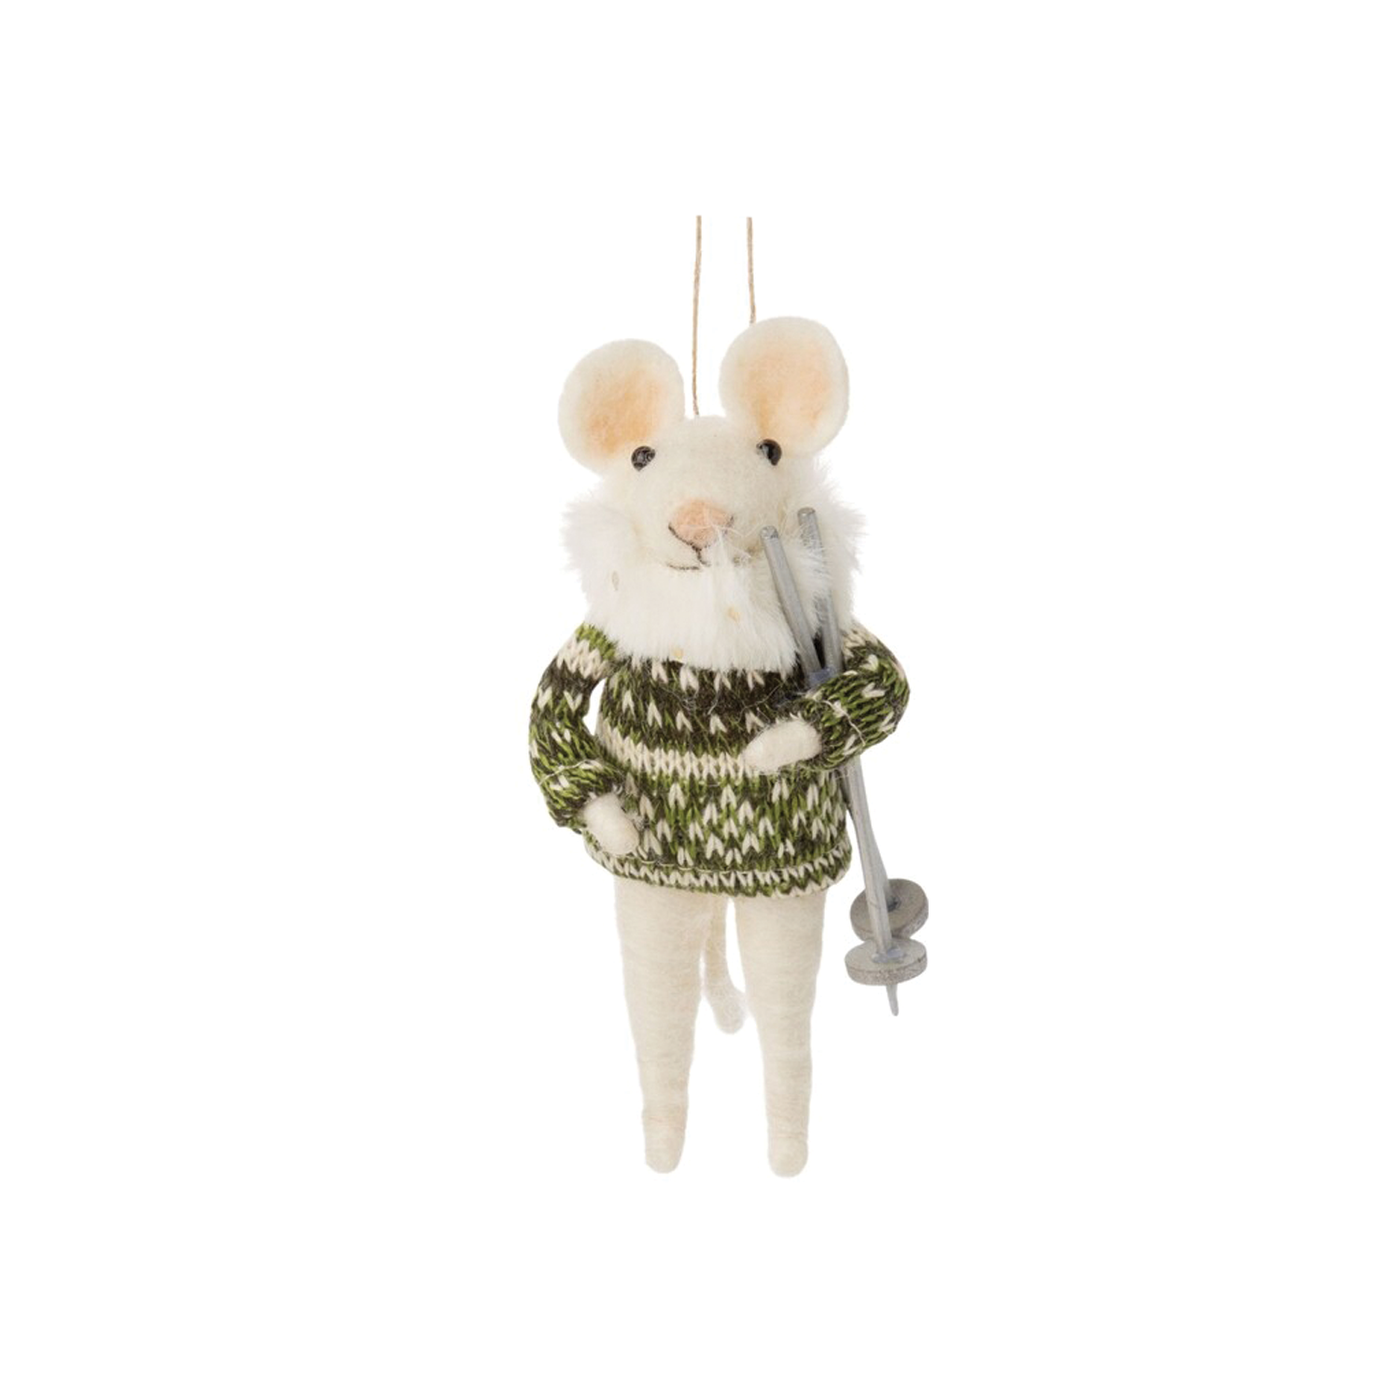 Mouse With Sweater And Ski Poles Felt Ornament - Green